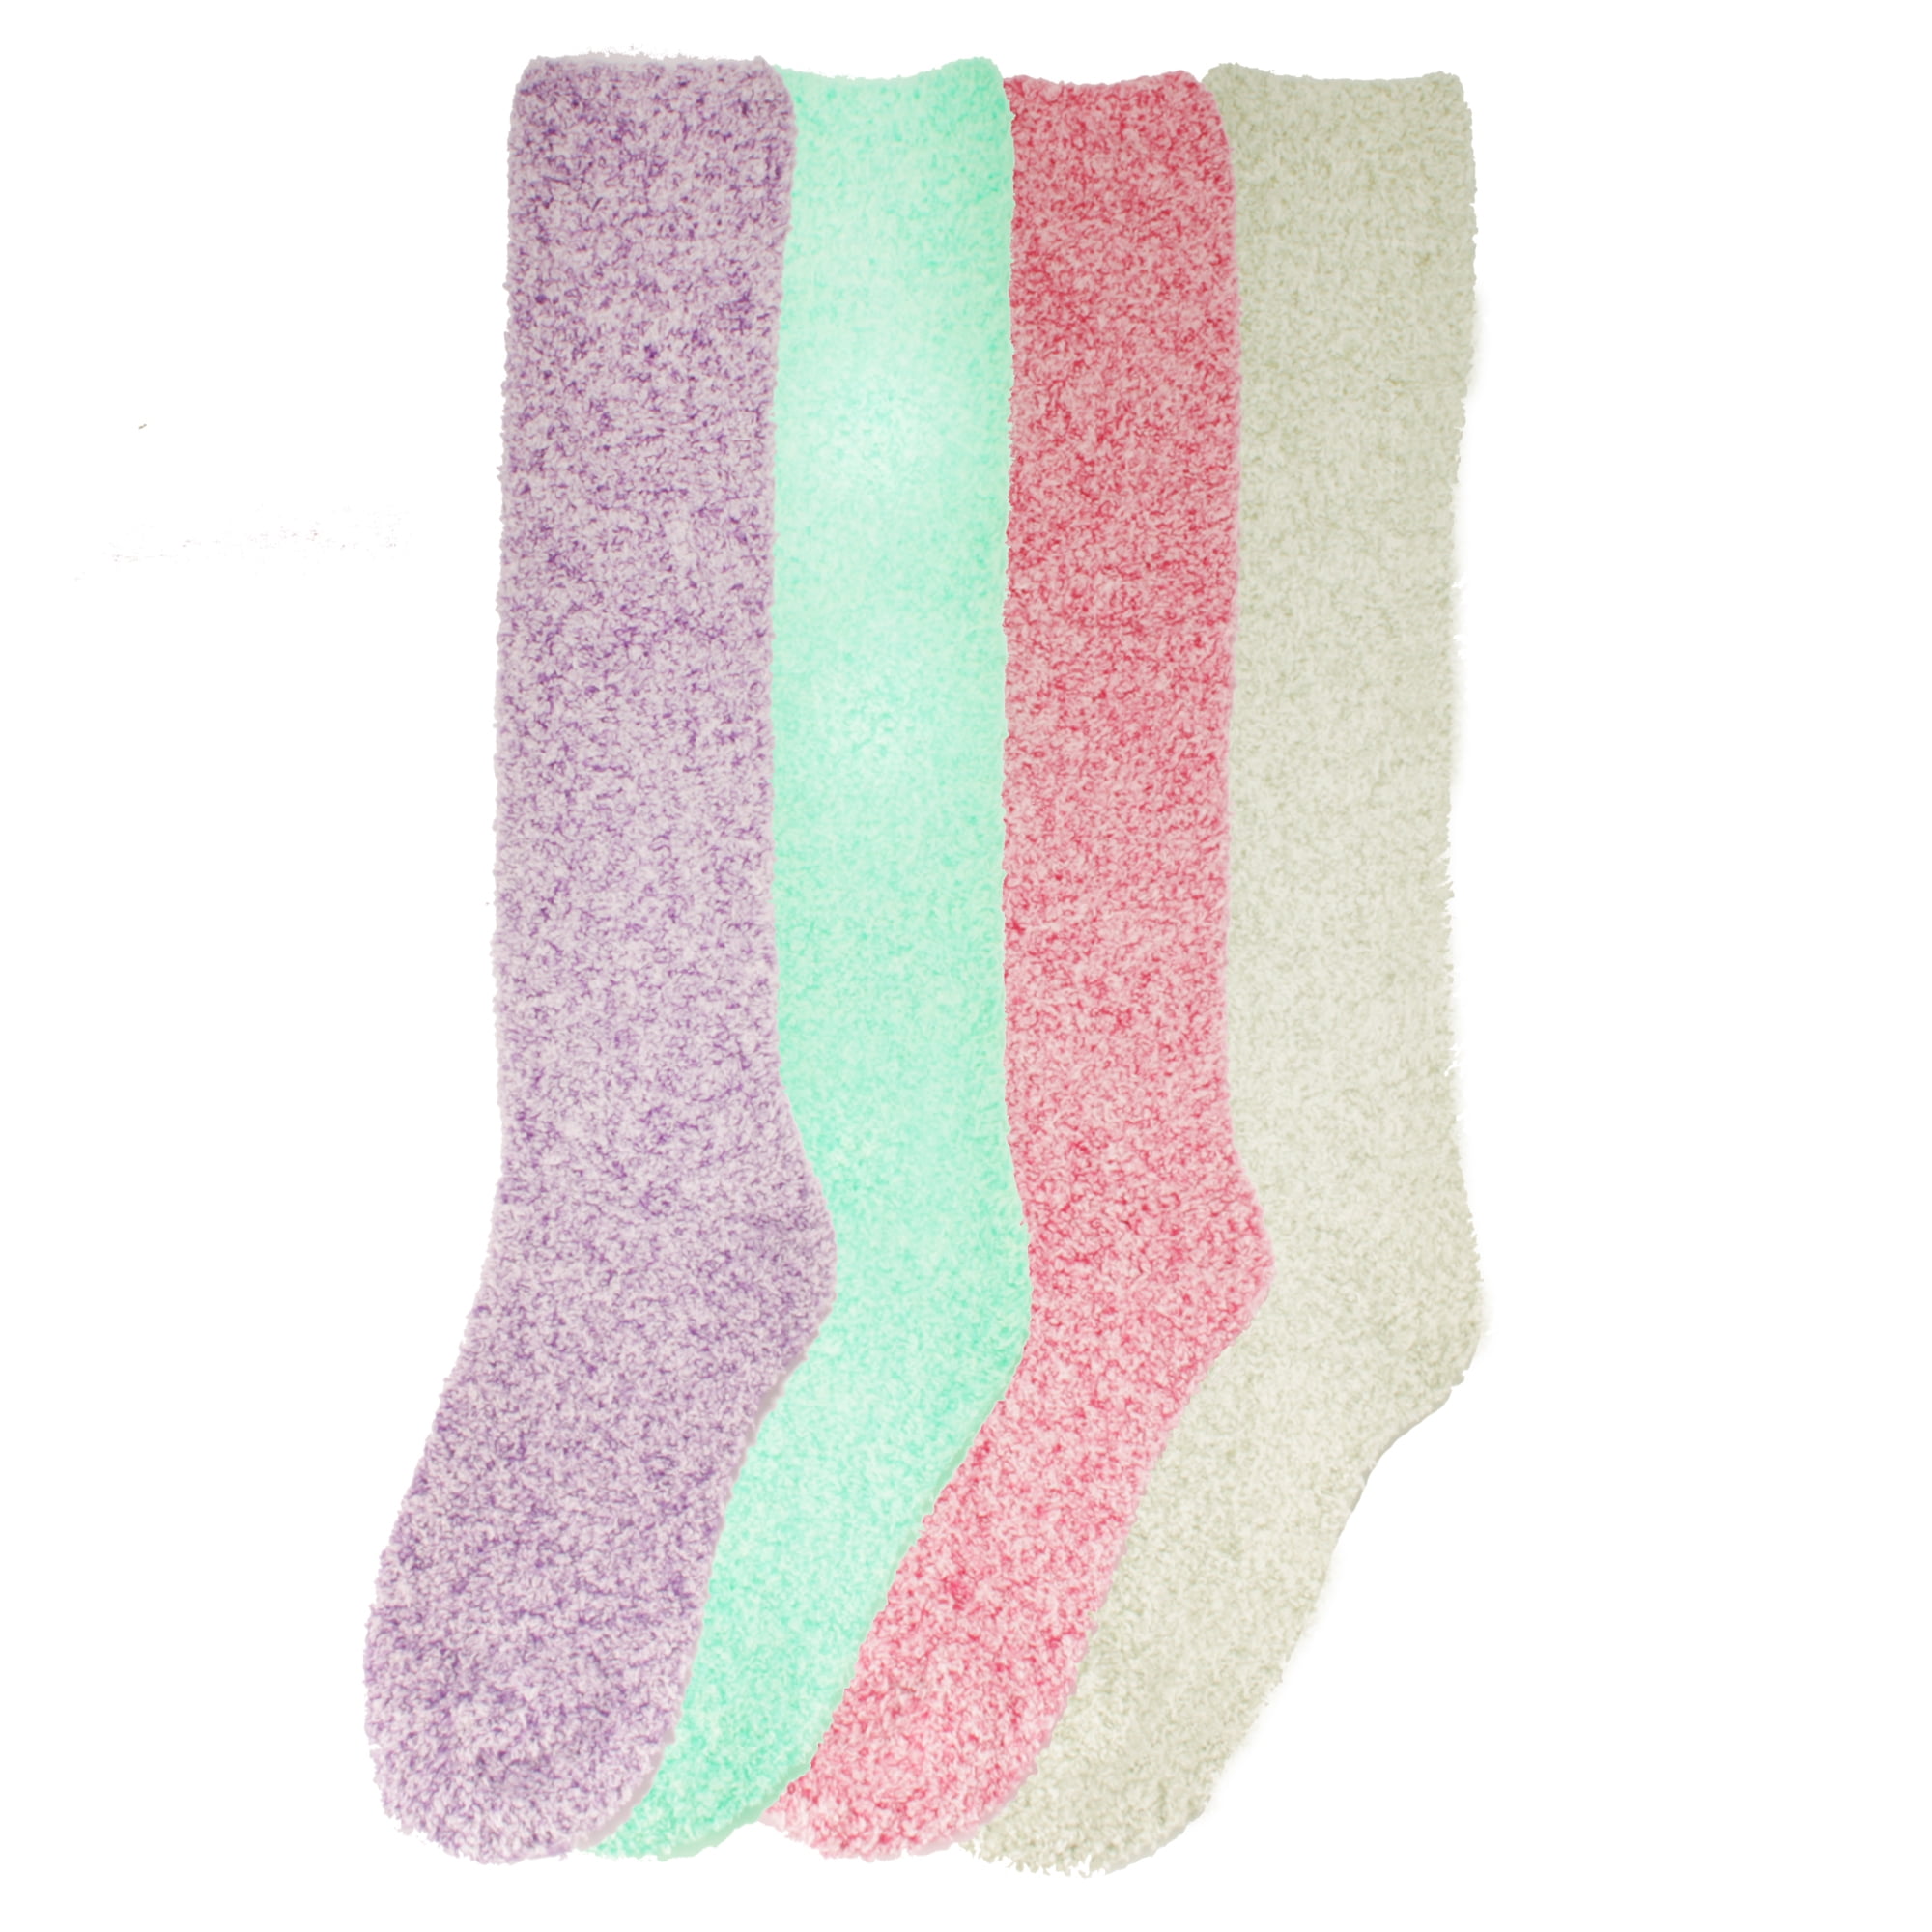 Women's Fuzzy Feather Soft Cozy Knee High Socks - Assortment 4A - 4 Pairs -  Size M/L (4-10) 